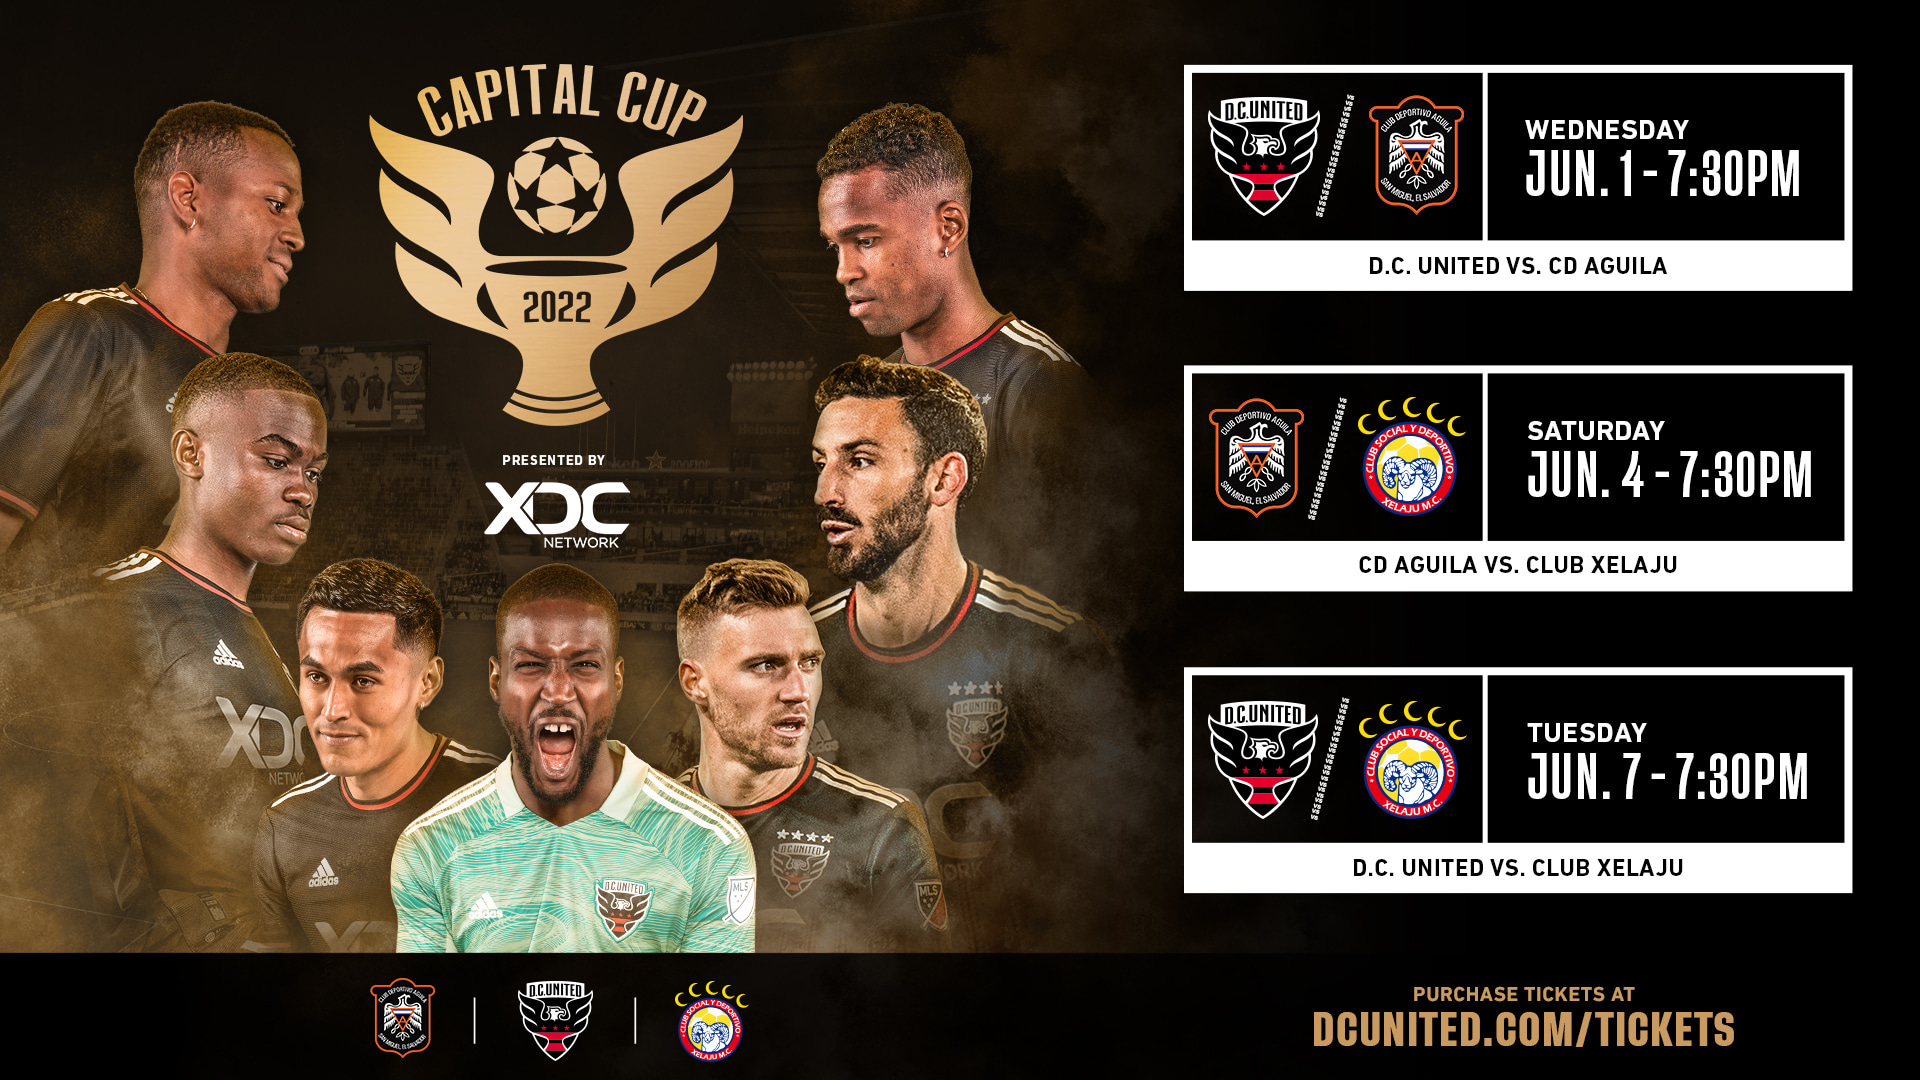 Audi Field to Host Second Annual Capital Cup Presented by XDC Network